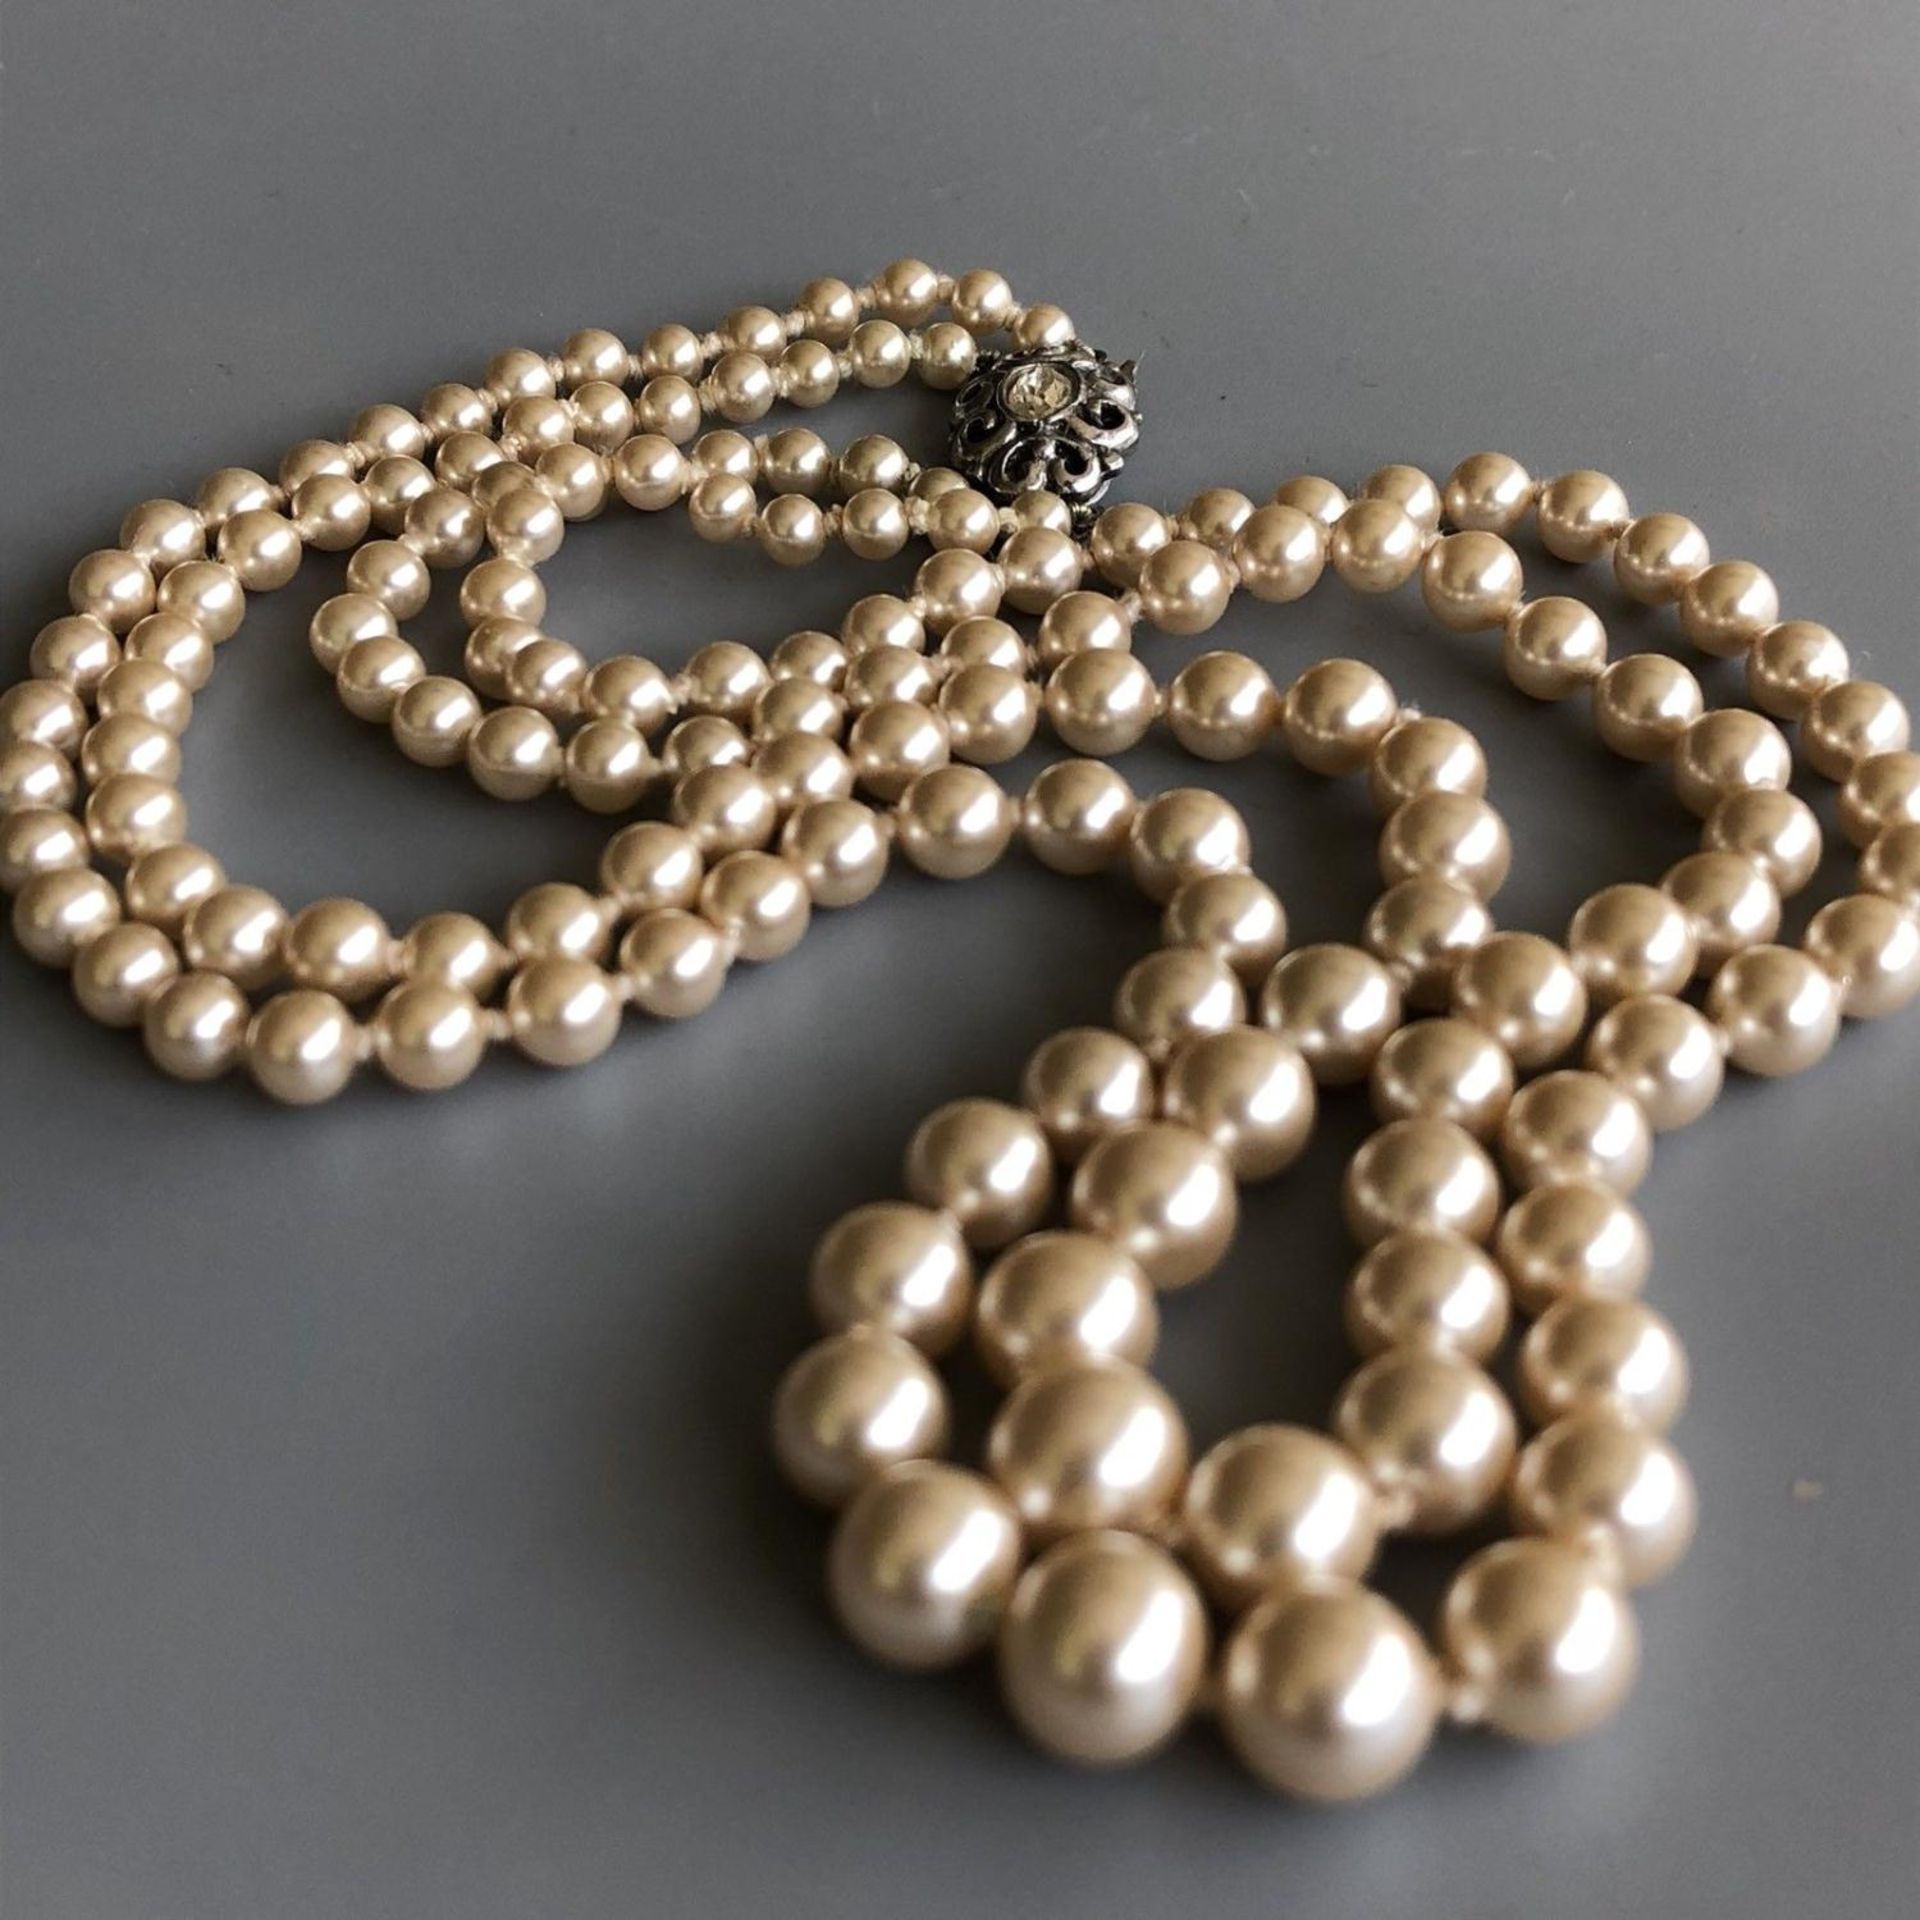 Fine quality vintage faux pearl twin strand 16" necklace with solid SILVER clasp